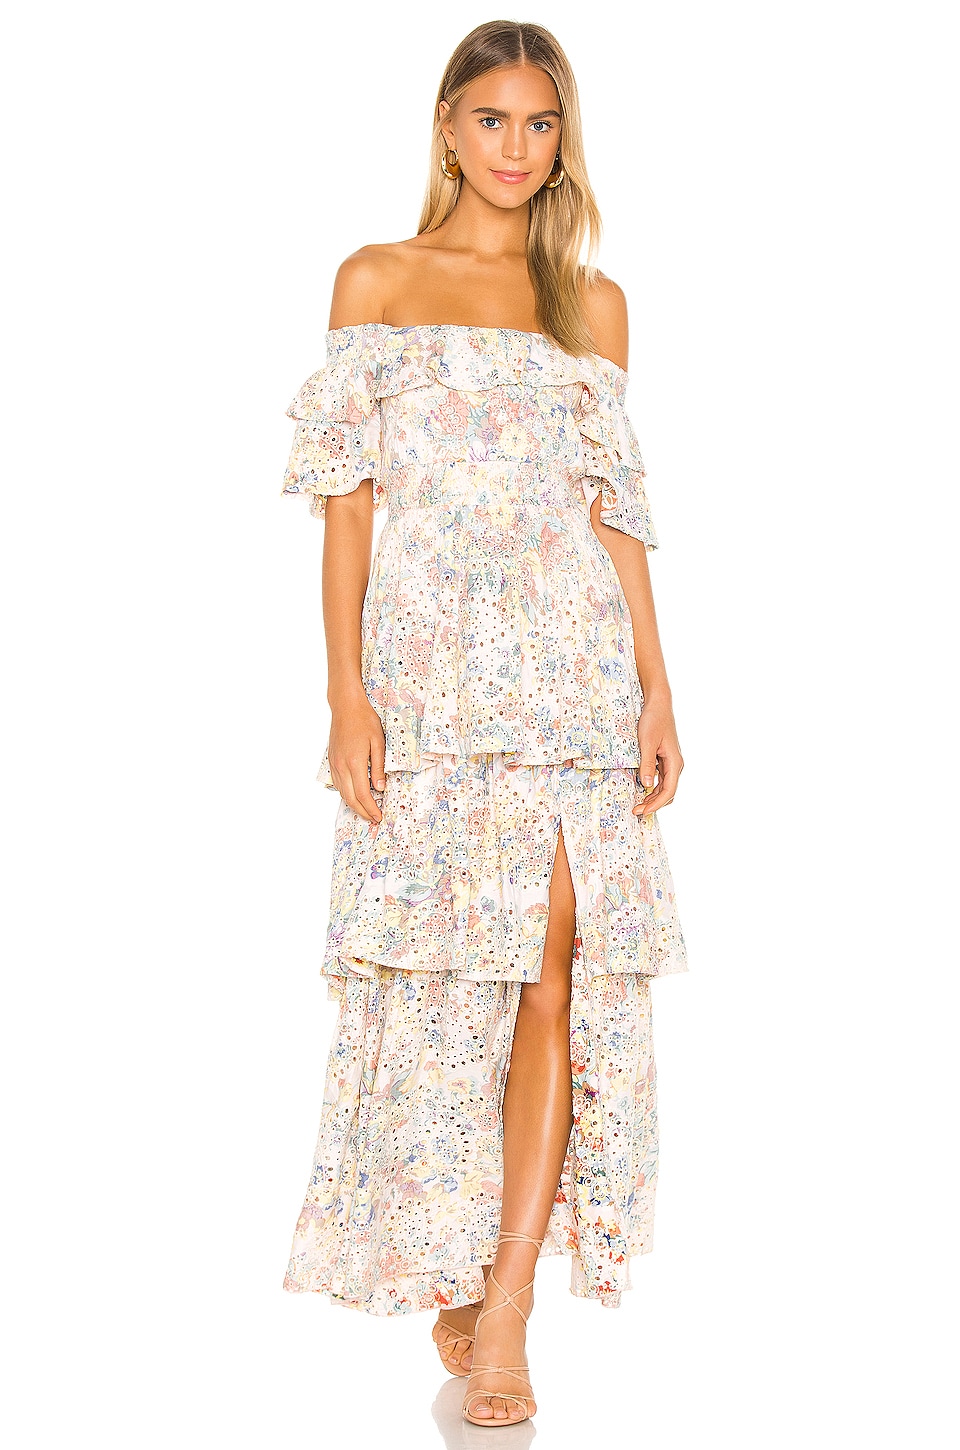 KENDALL + KYLIE Anglaise Maxi Ruffle Dress in Collage Floral | REVOLVE